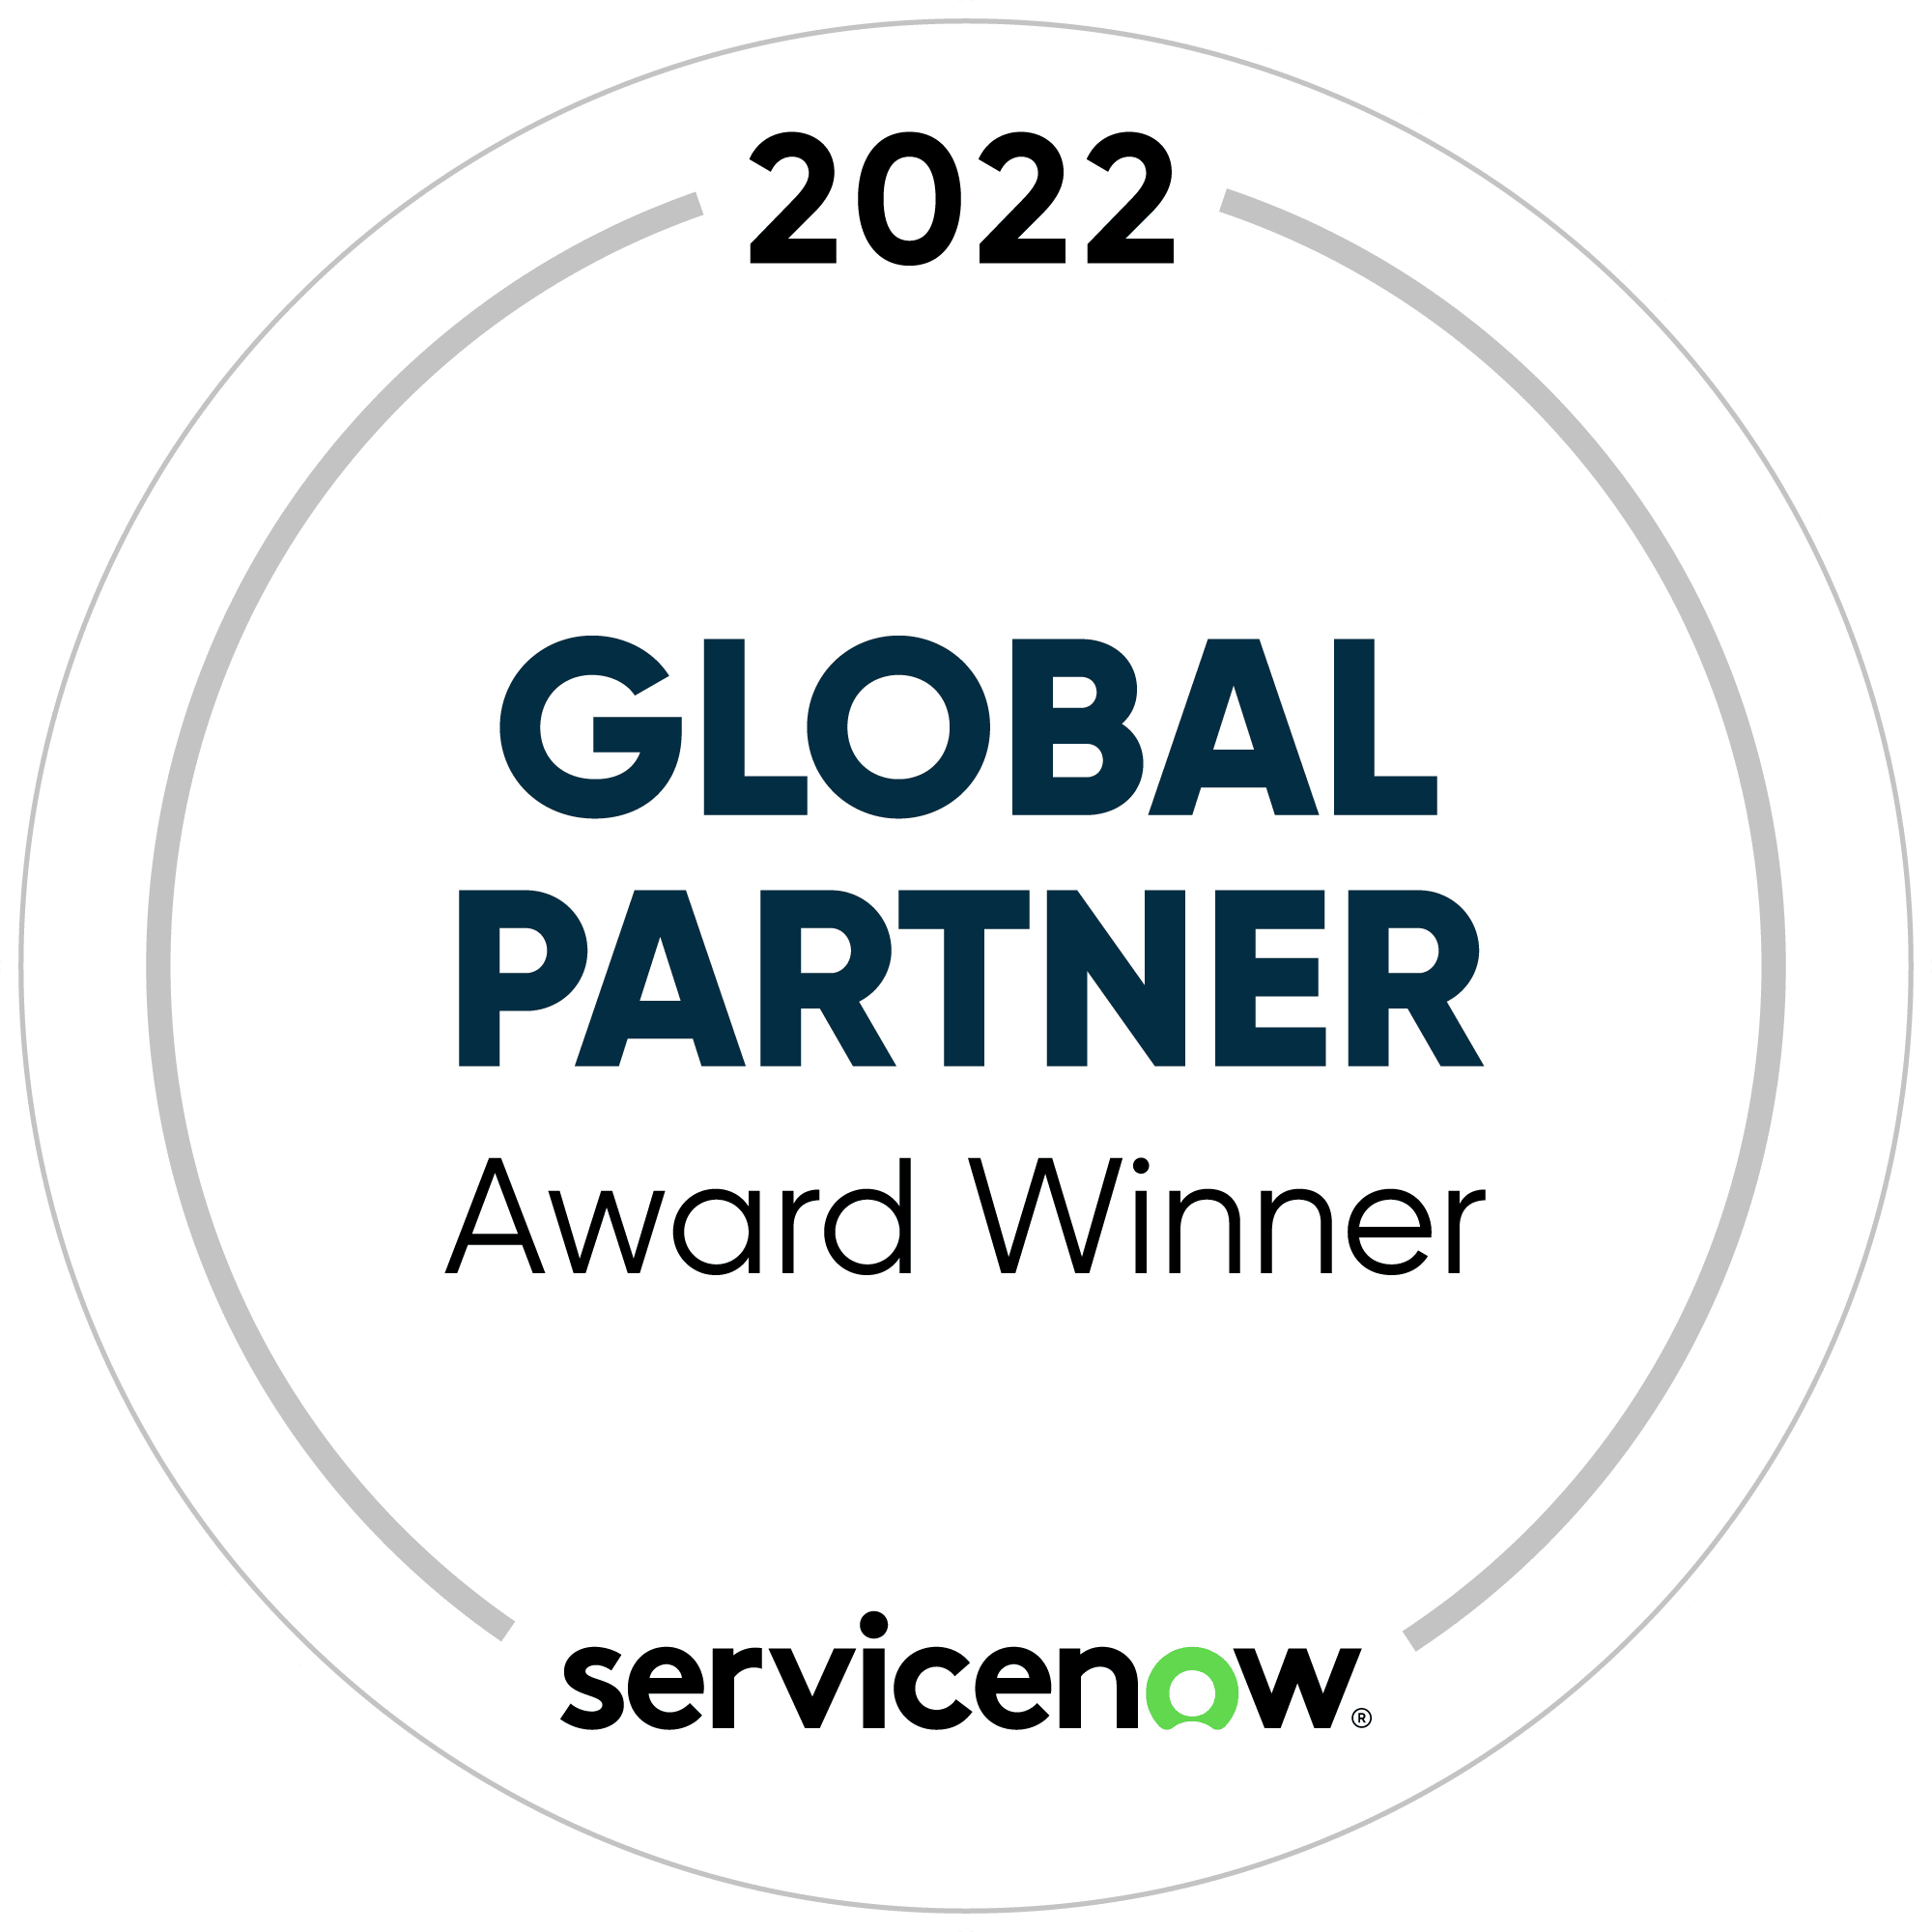 https://www.inry.com/hubfs/servicenow-global-partner.png